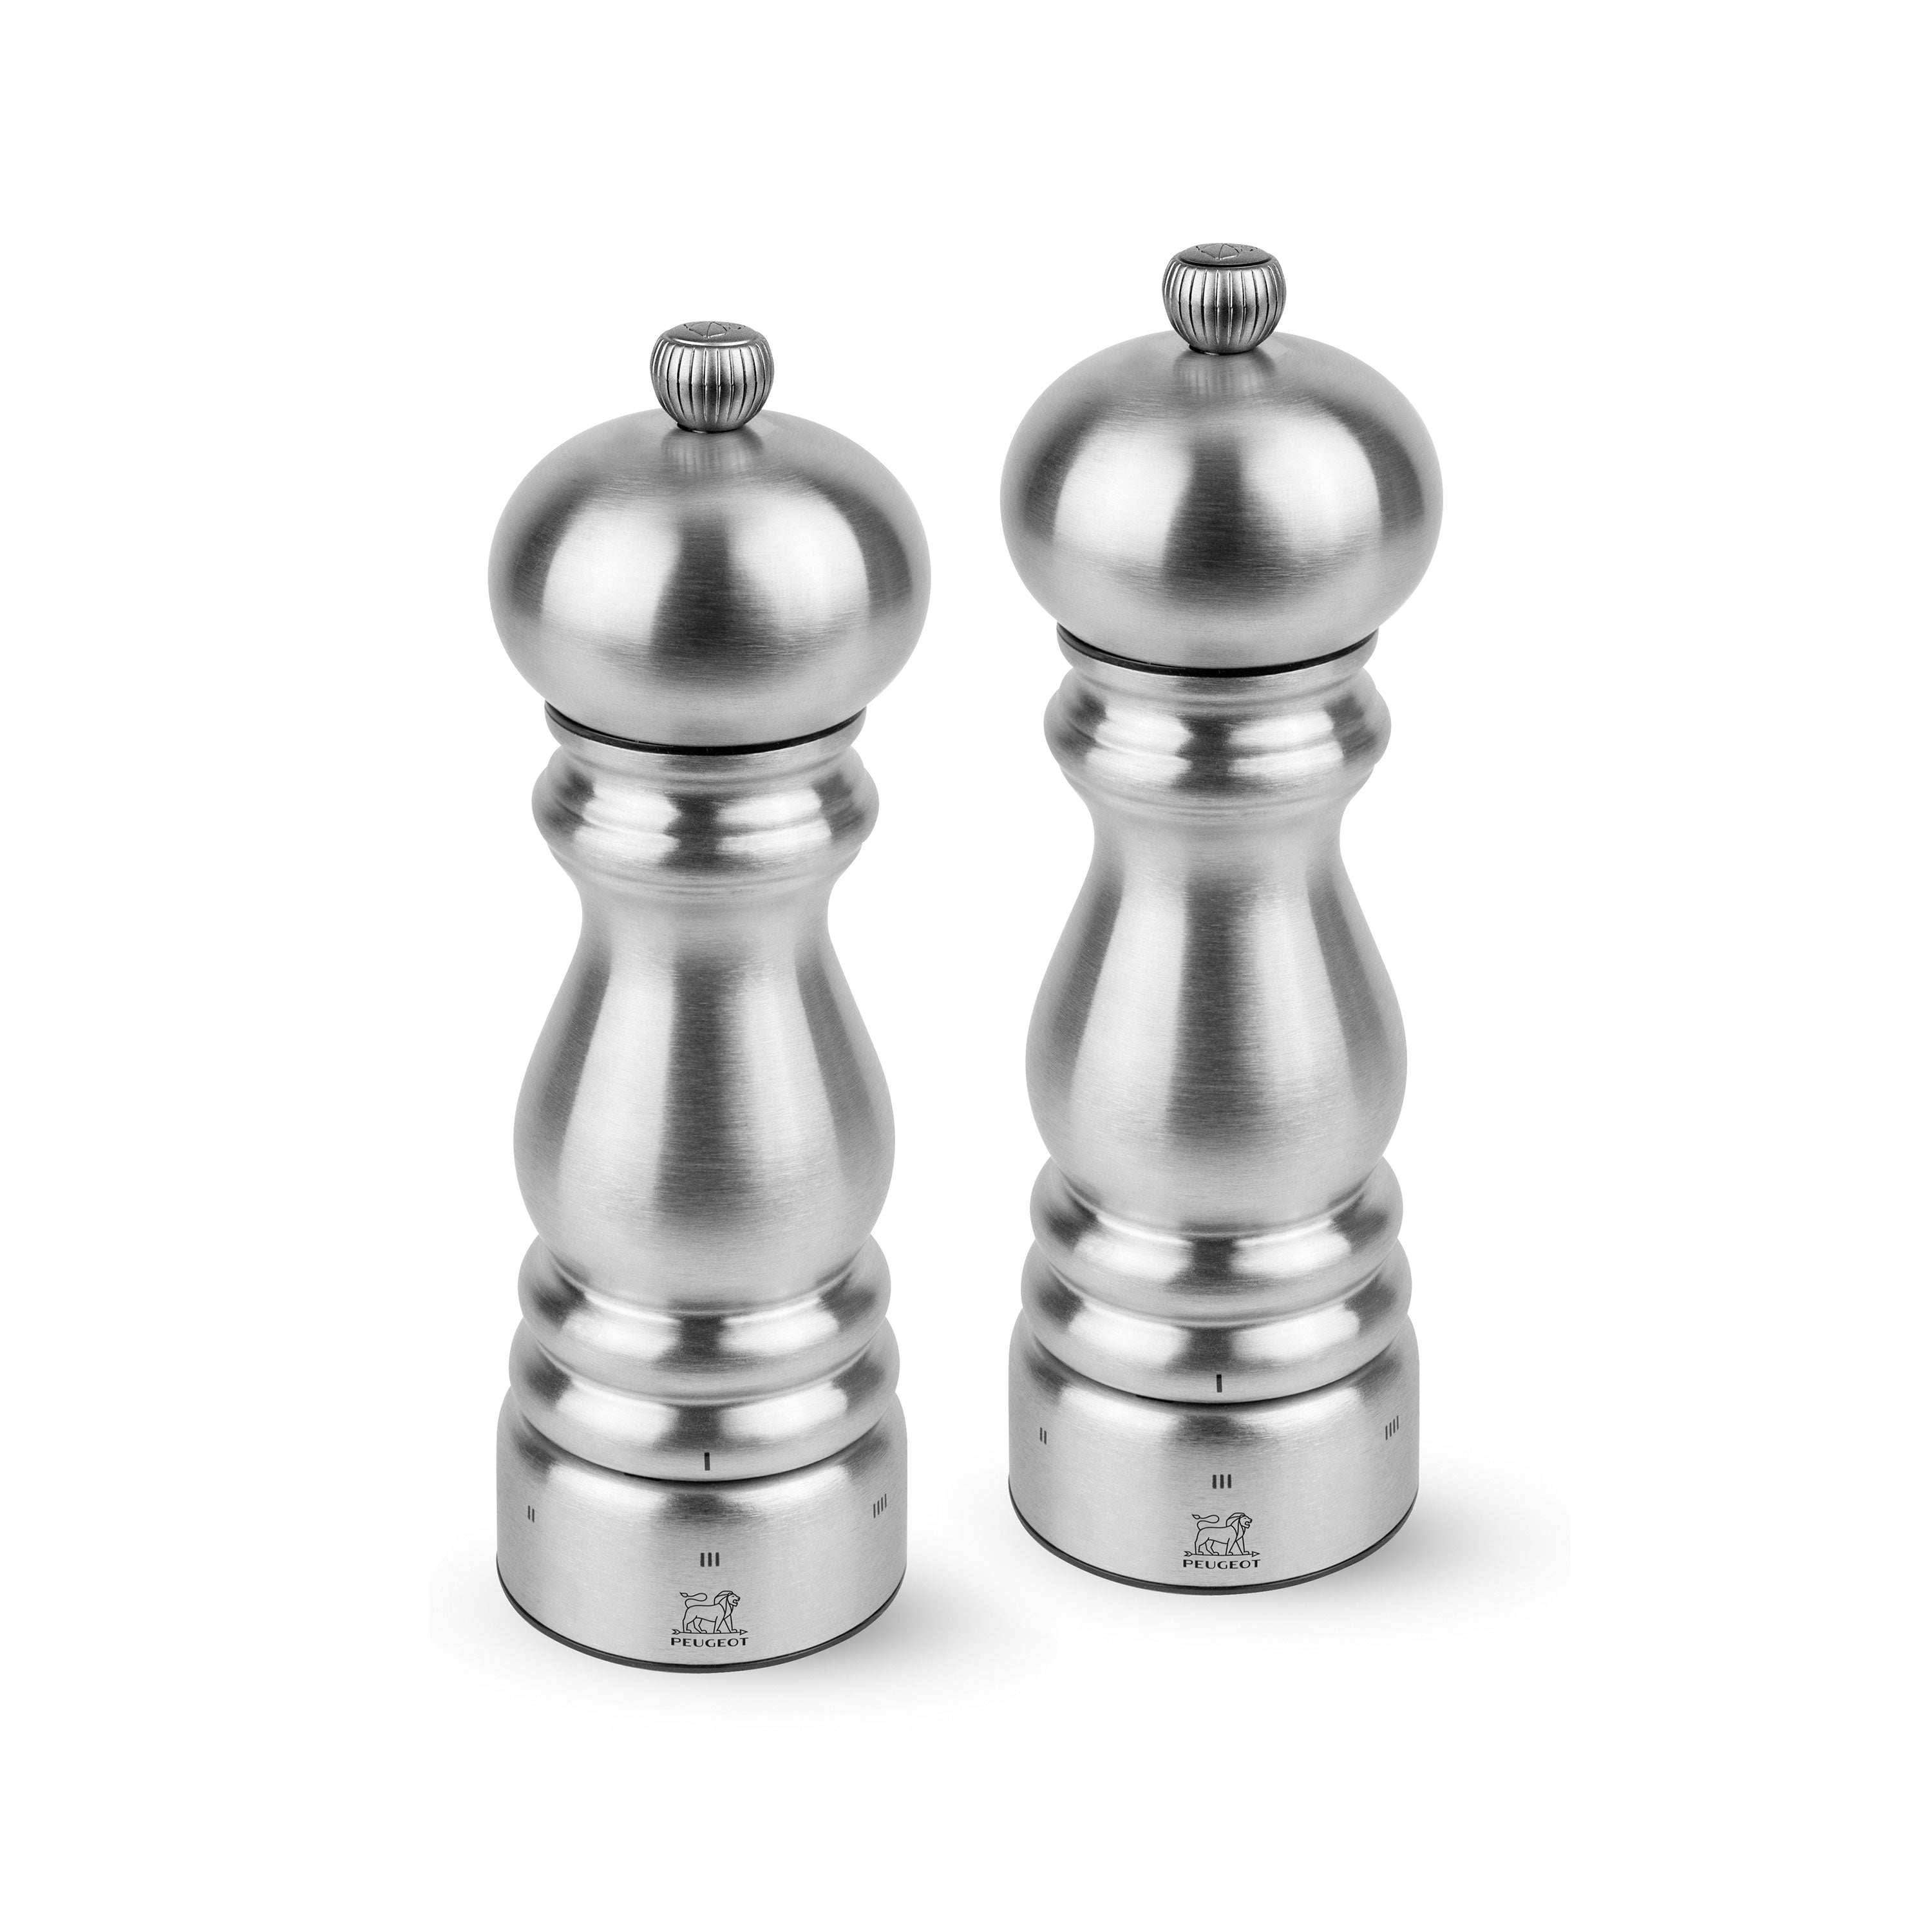 Peugeot Stainless Steel Salt & Pepper Mill Set - Paris 7 u'Select –  Cutlery and More